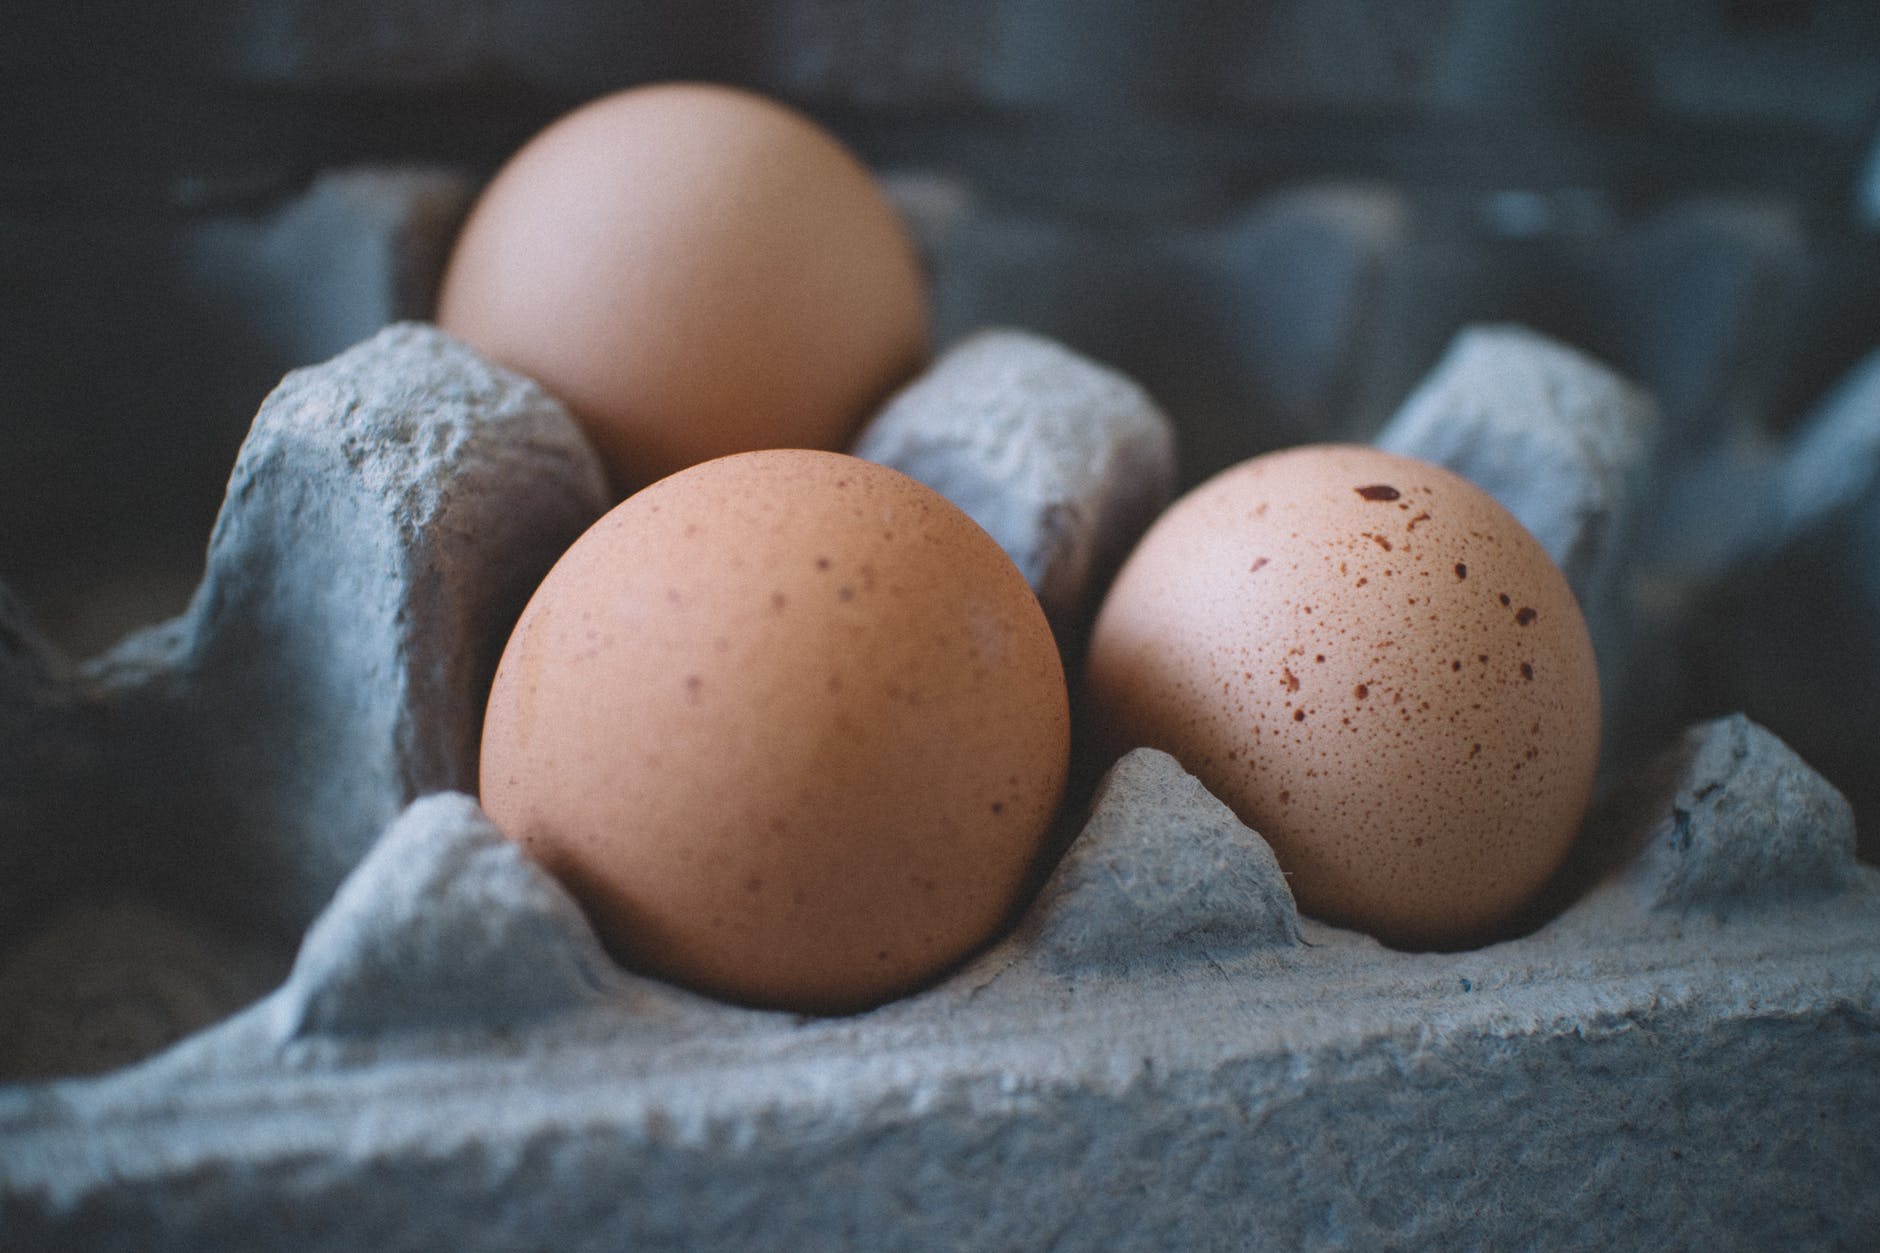 Can I Eat Fertilized Chicken Eggs? Plus Other Frequently Asked Questions About Eggs